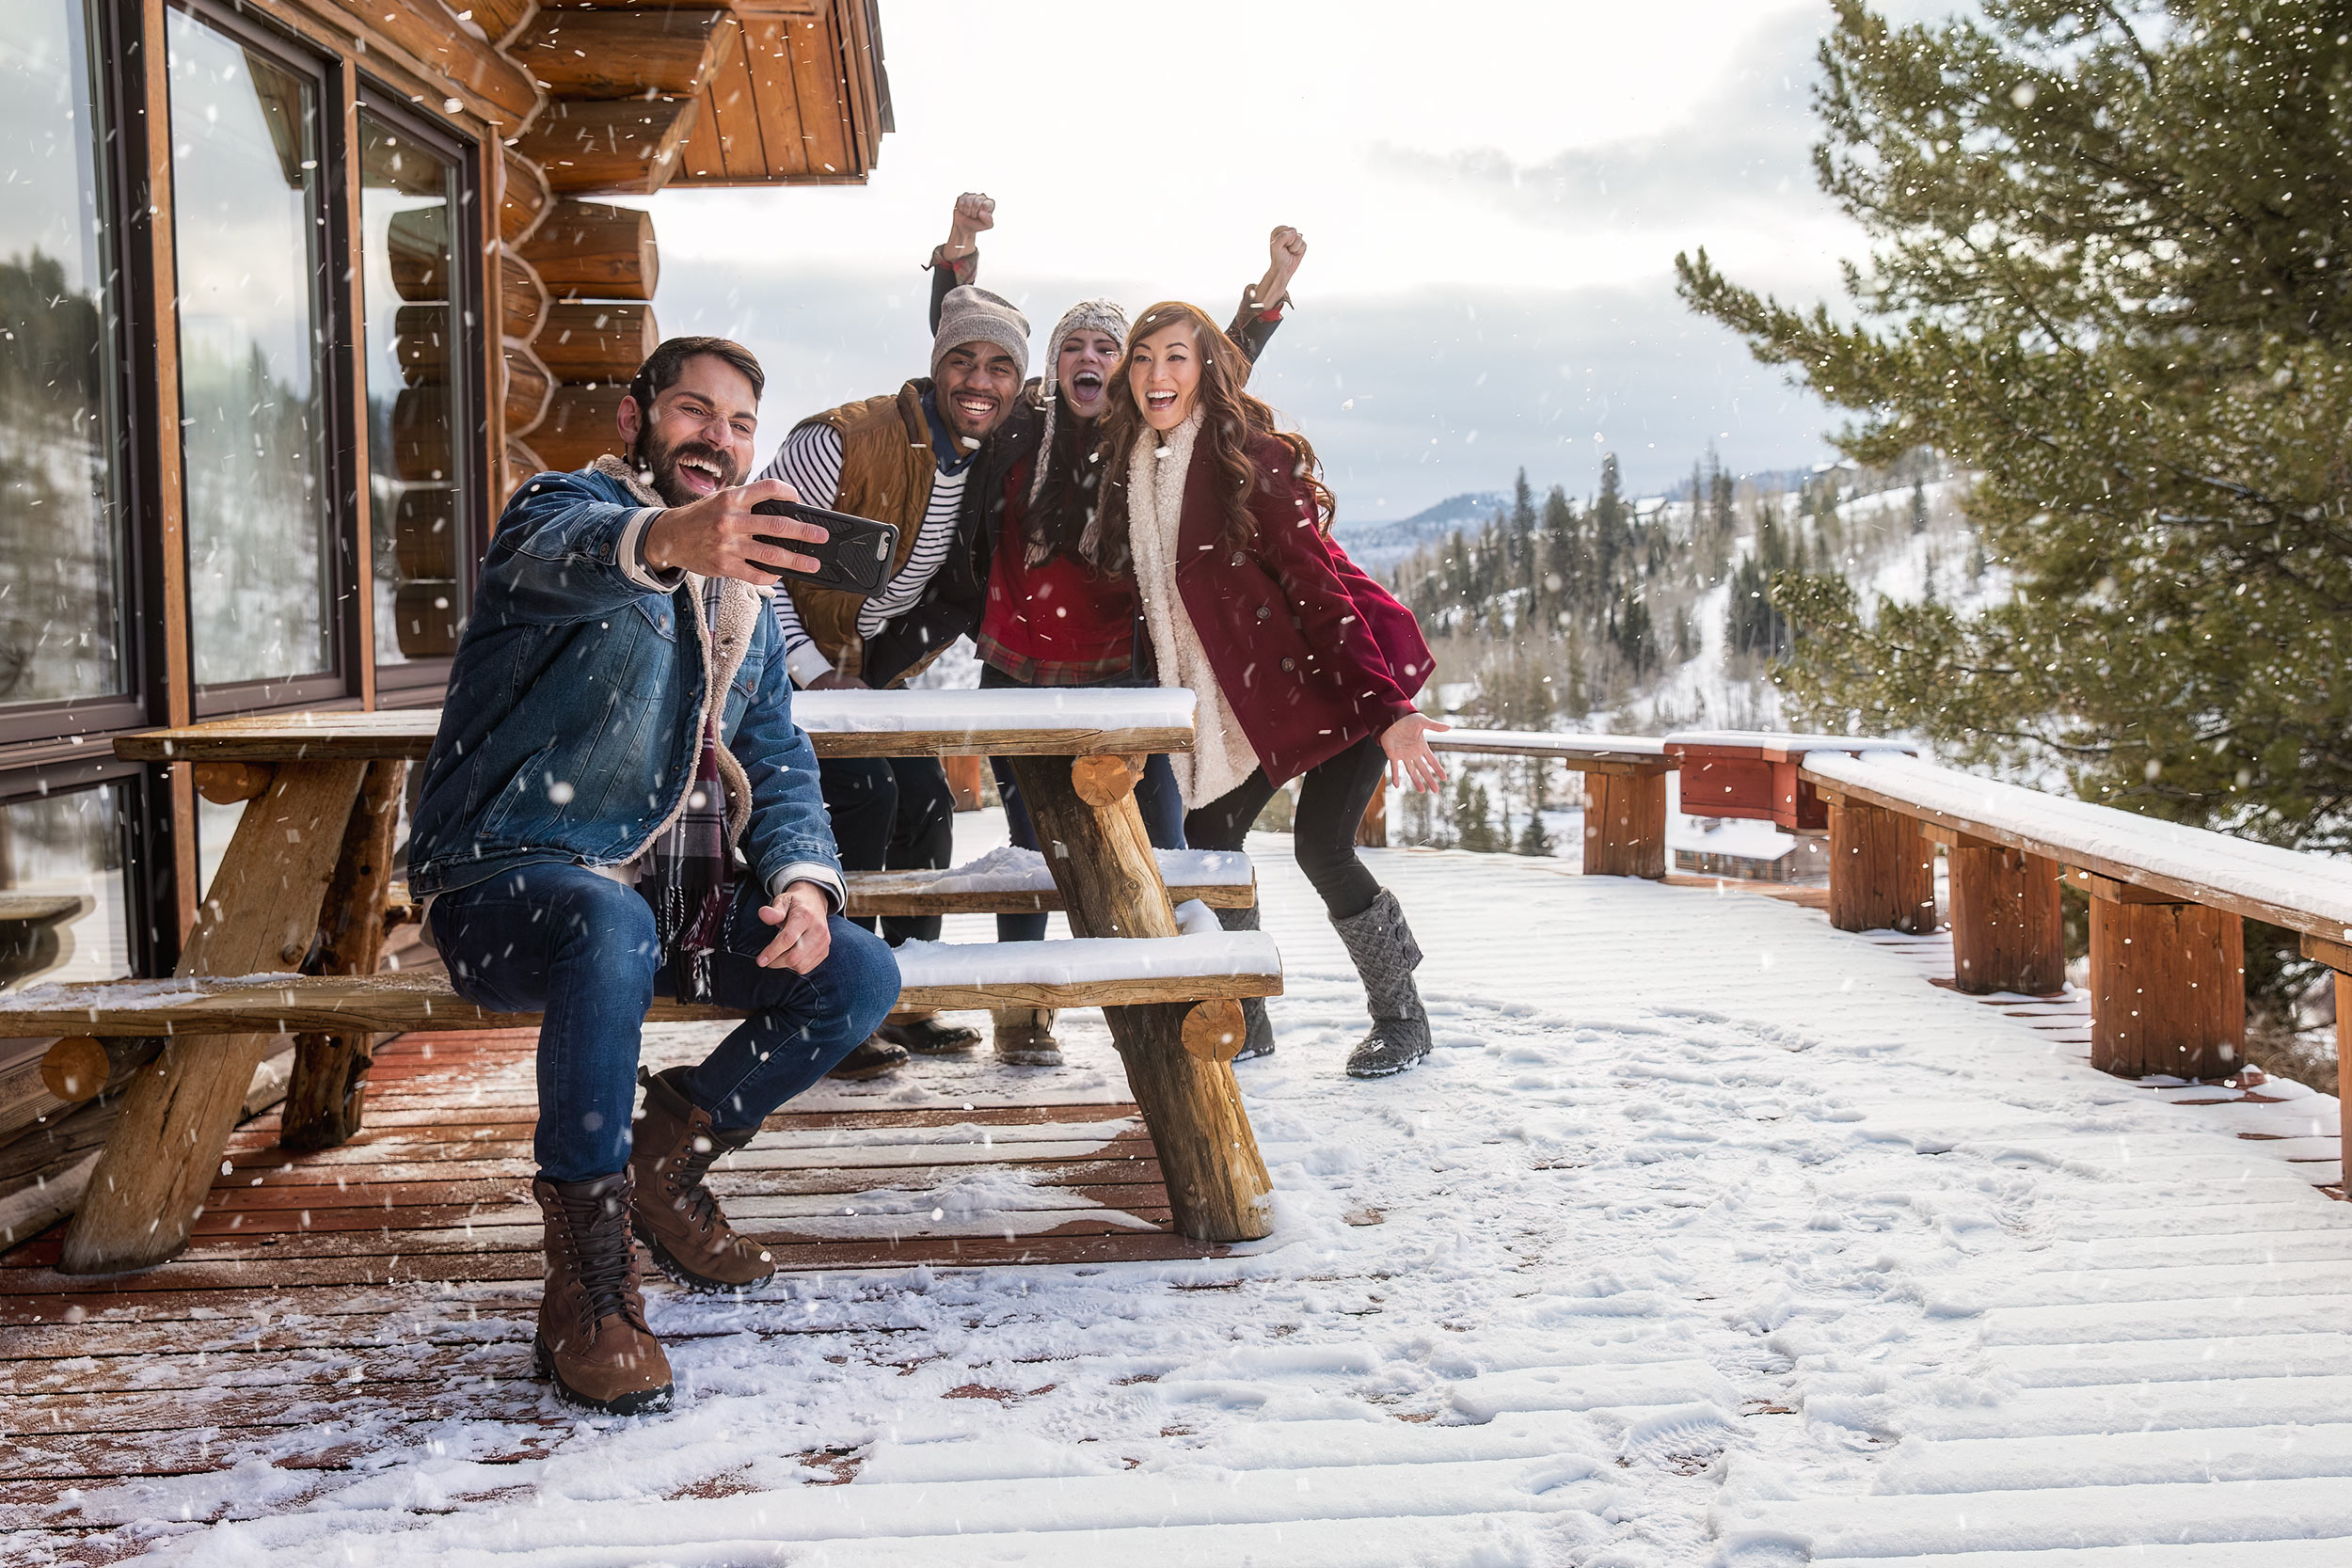 Friends taking a selfie outside on a snow covered porch for The Travel Channel